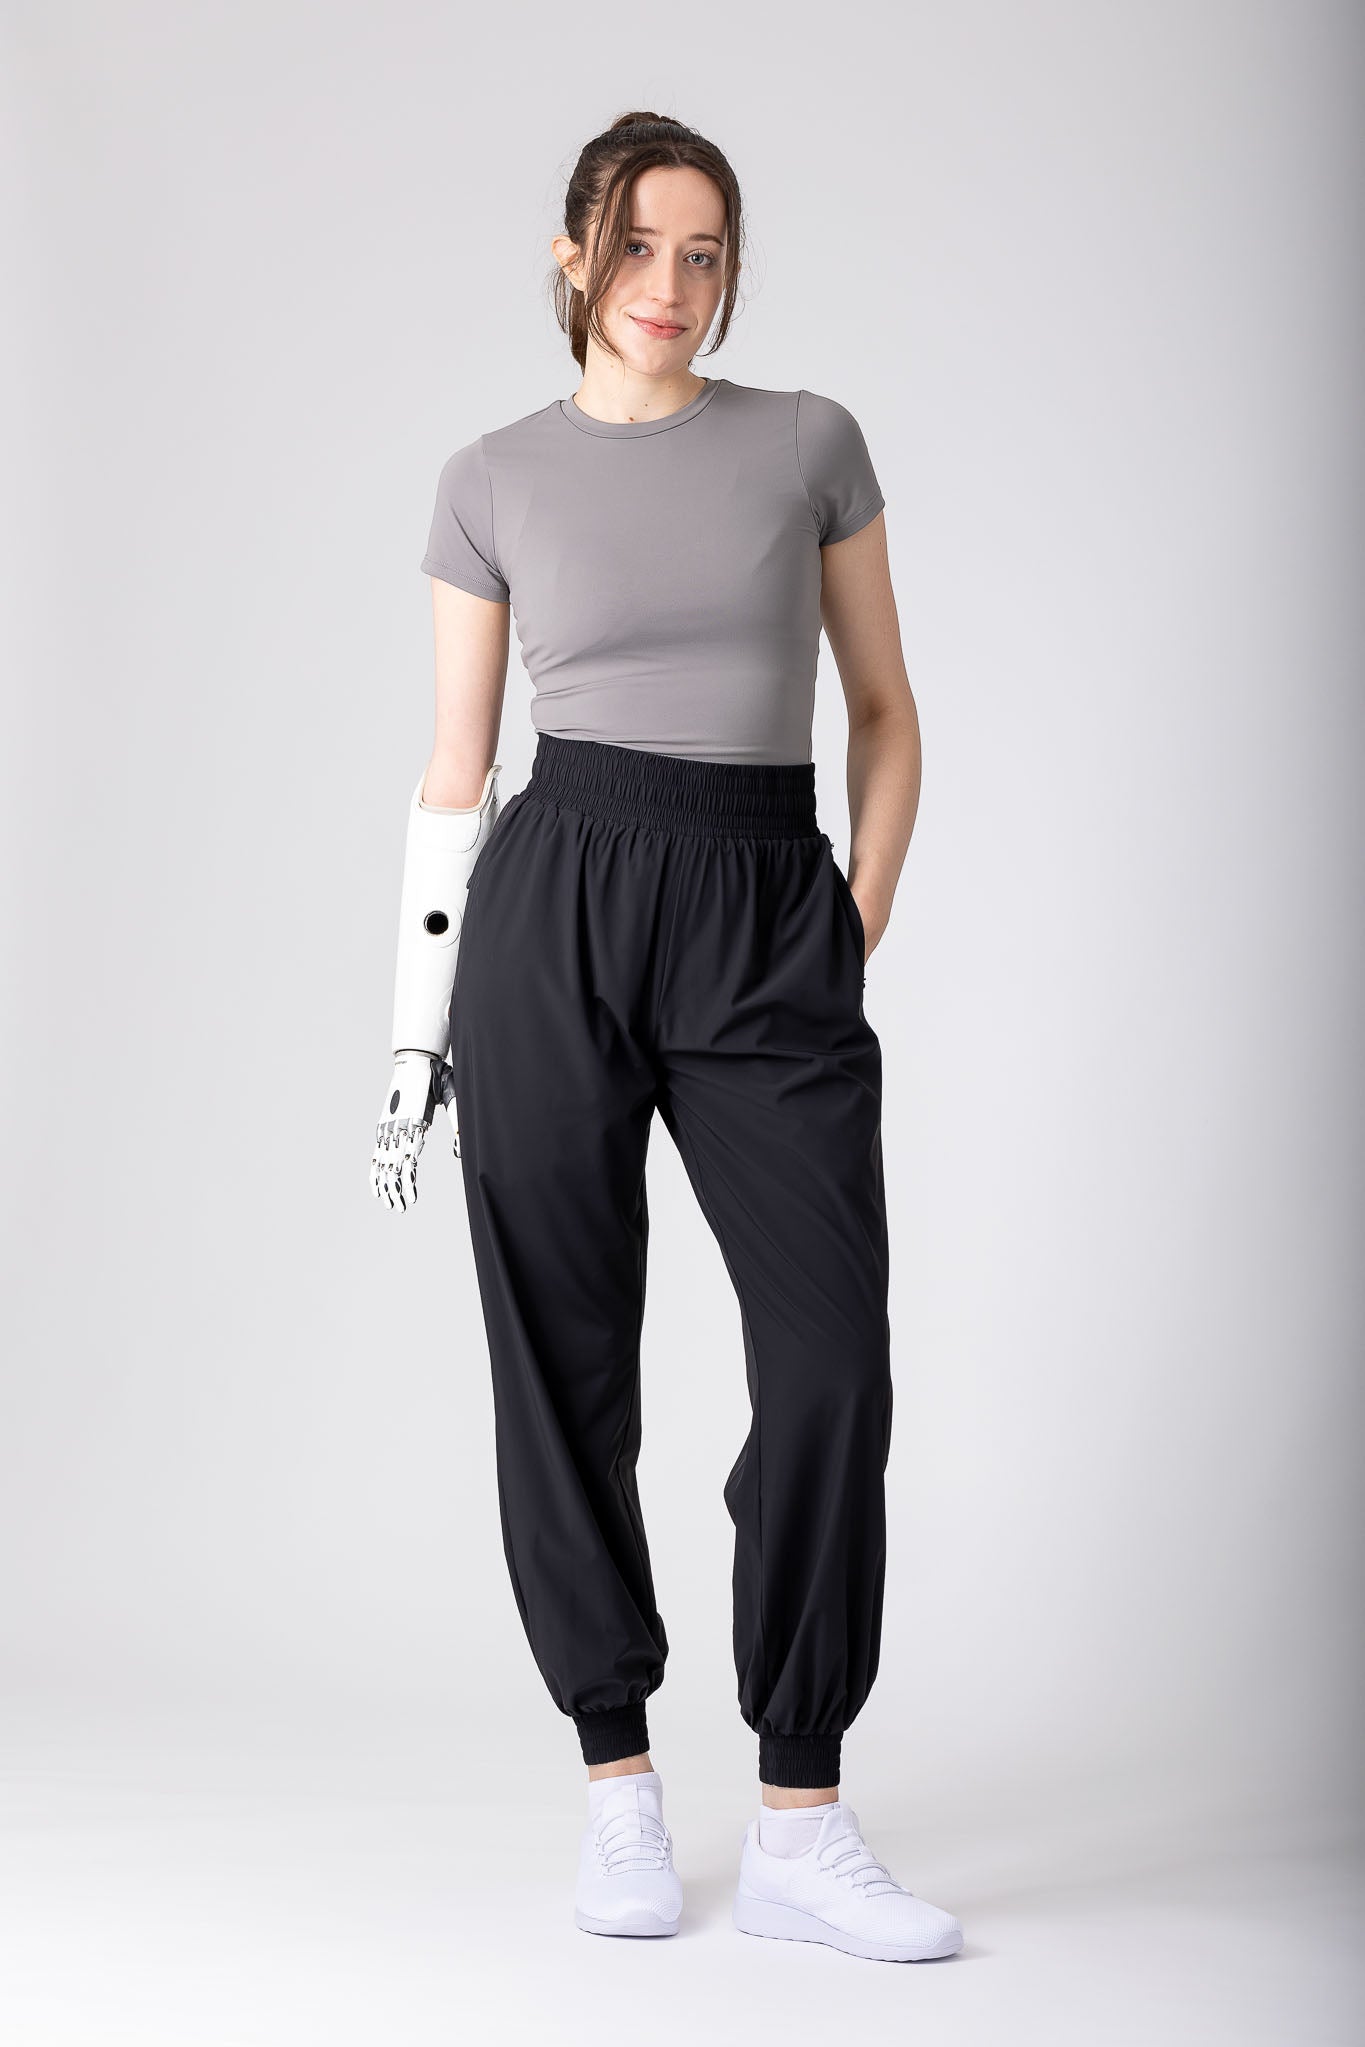 Lightweight joggers in black, with pockets and hight supportive waist.